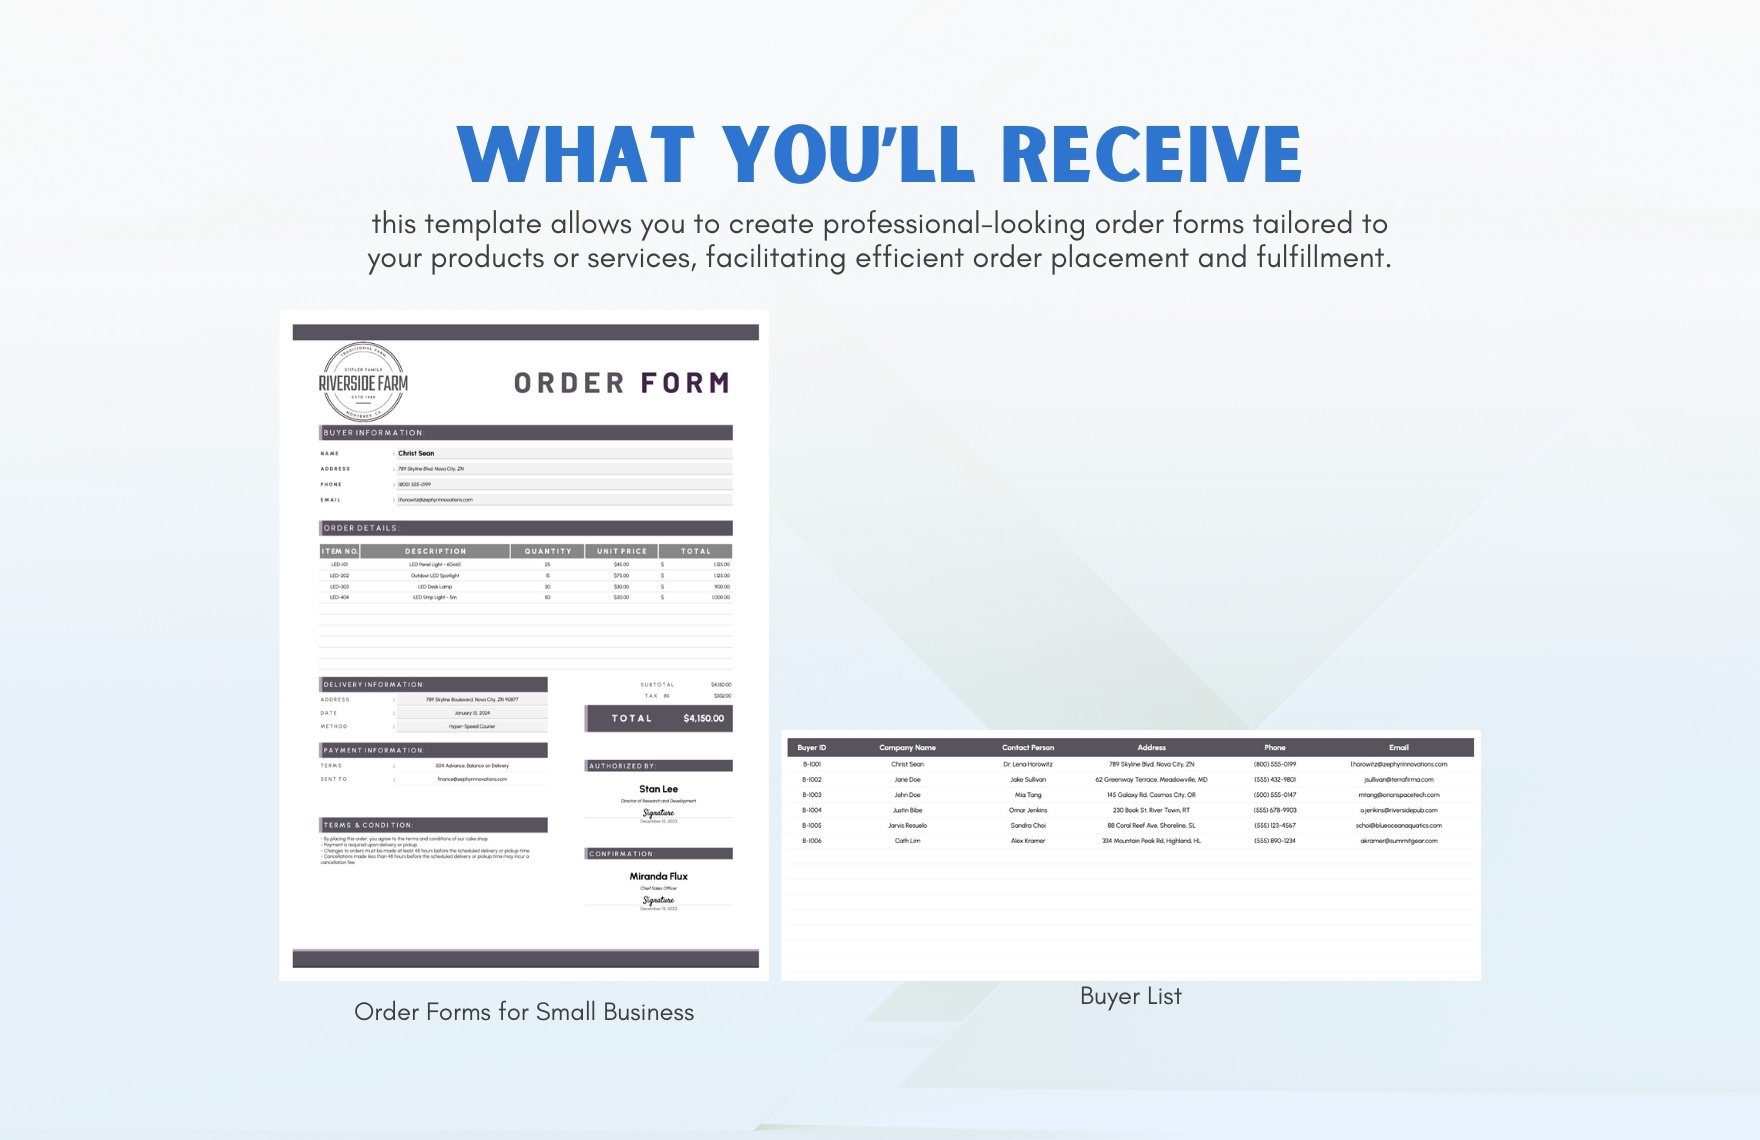 Order Forms for Small Business Template